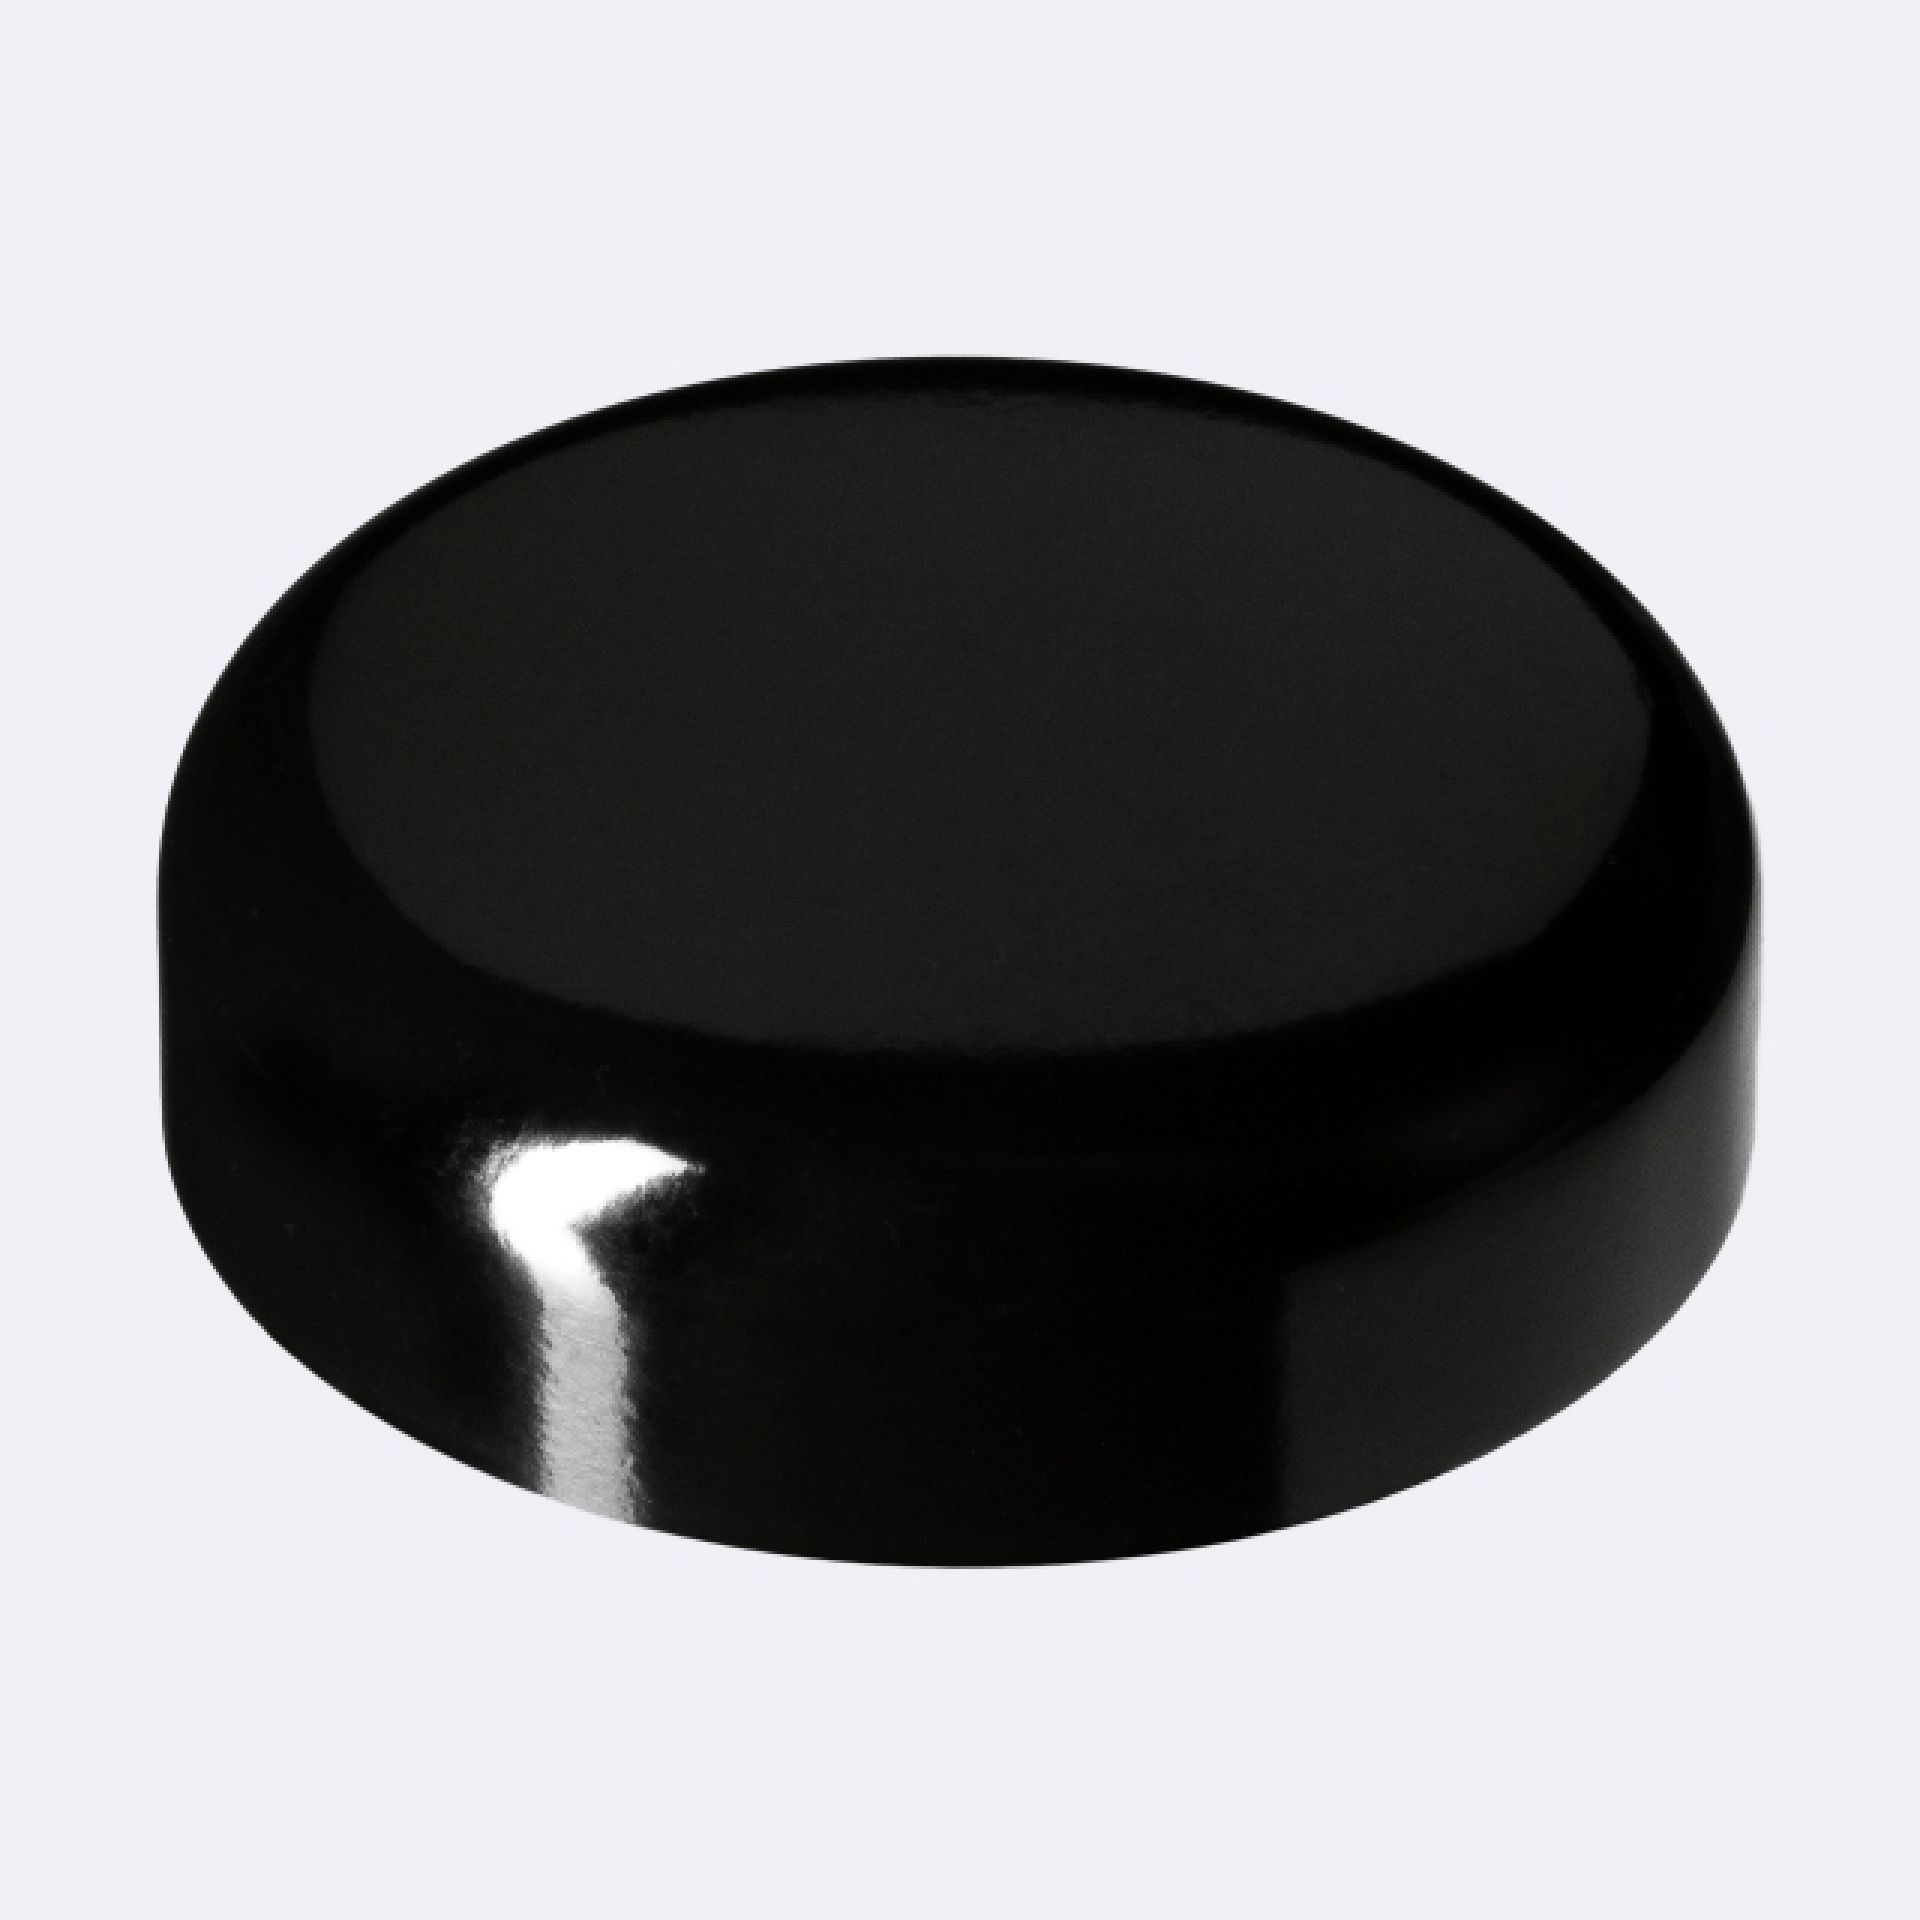 Lid Classic 49 special thread, UREA, black, glossy finish, violet Phan inlay (Ceres 50)